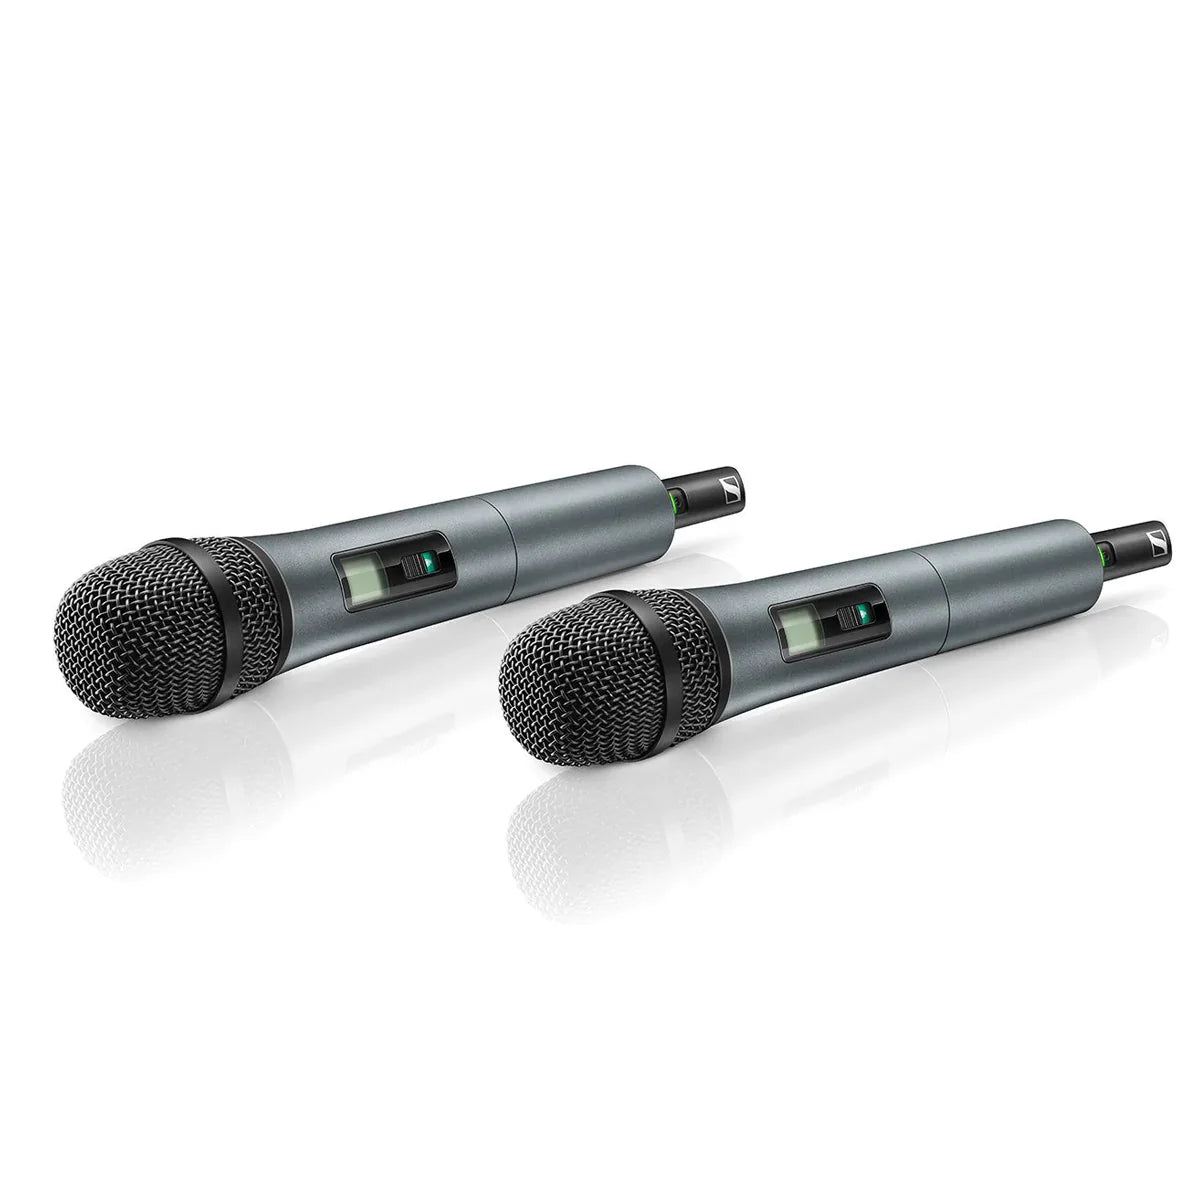 Sennheiser XSW 1-825 DUAL-B Wireless System For Singers And Presenters